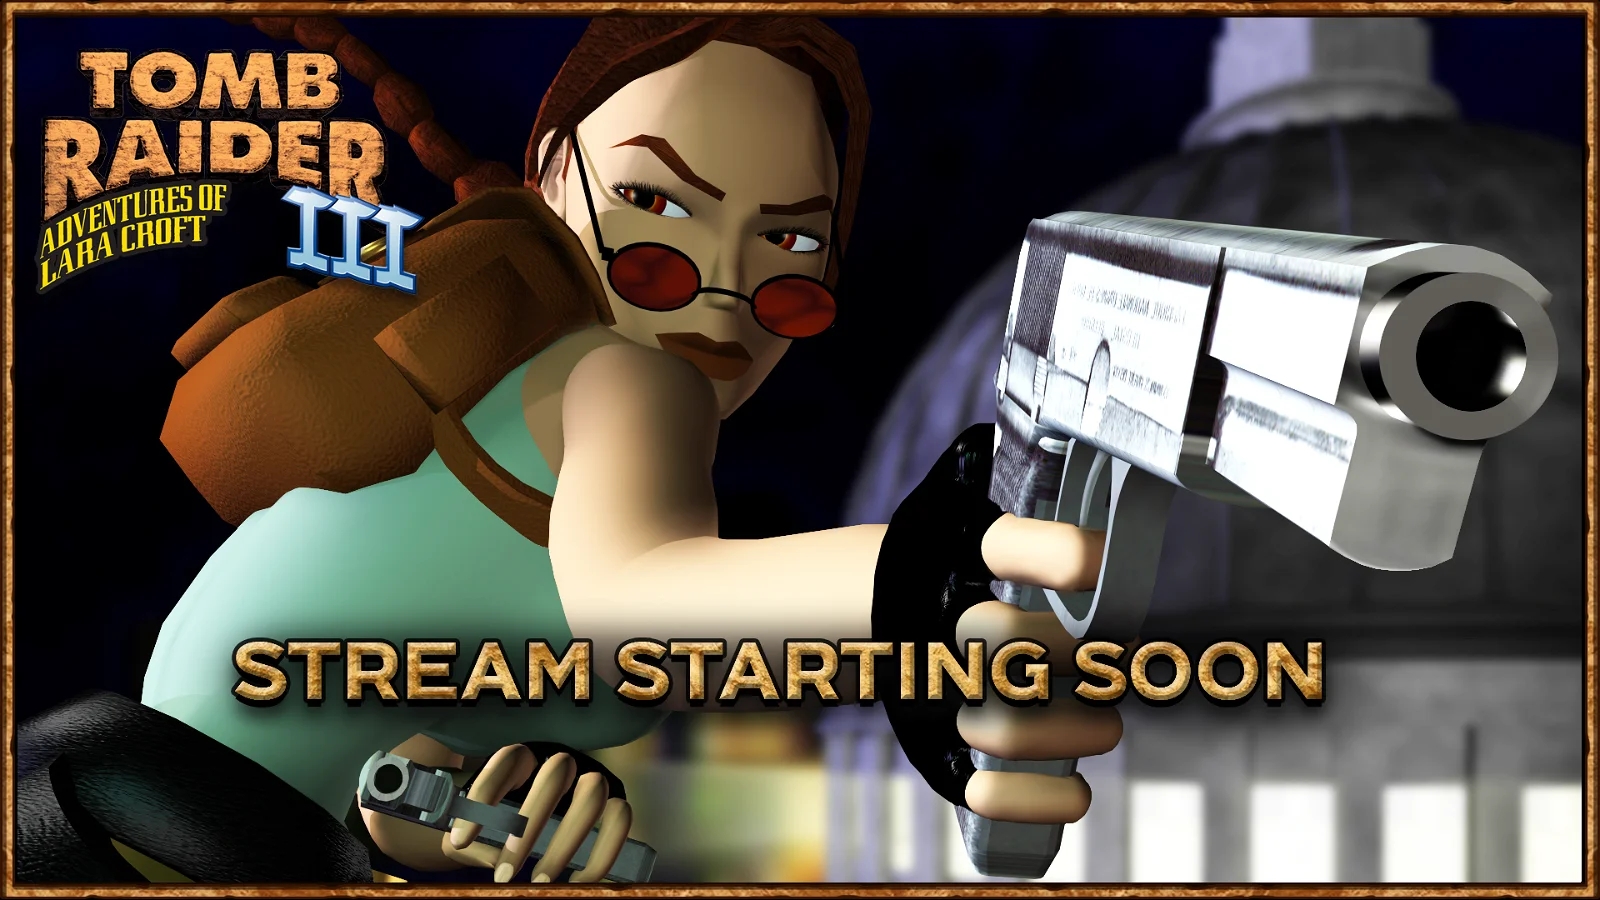 A "Tomb Raider III" streaming graphic with Lara Croft aiming a large silver pistol, wearing red sunglasses, with text "STREAM STARTING SOON."